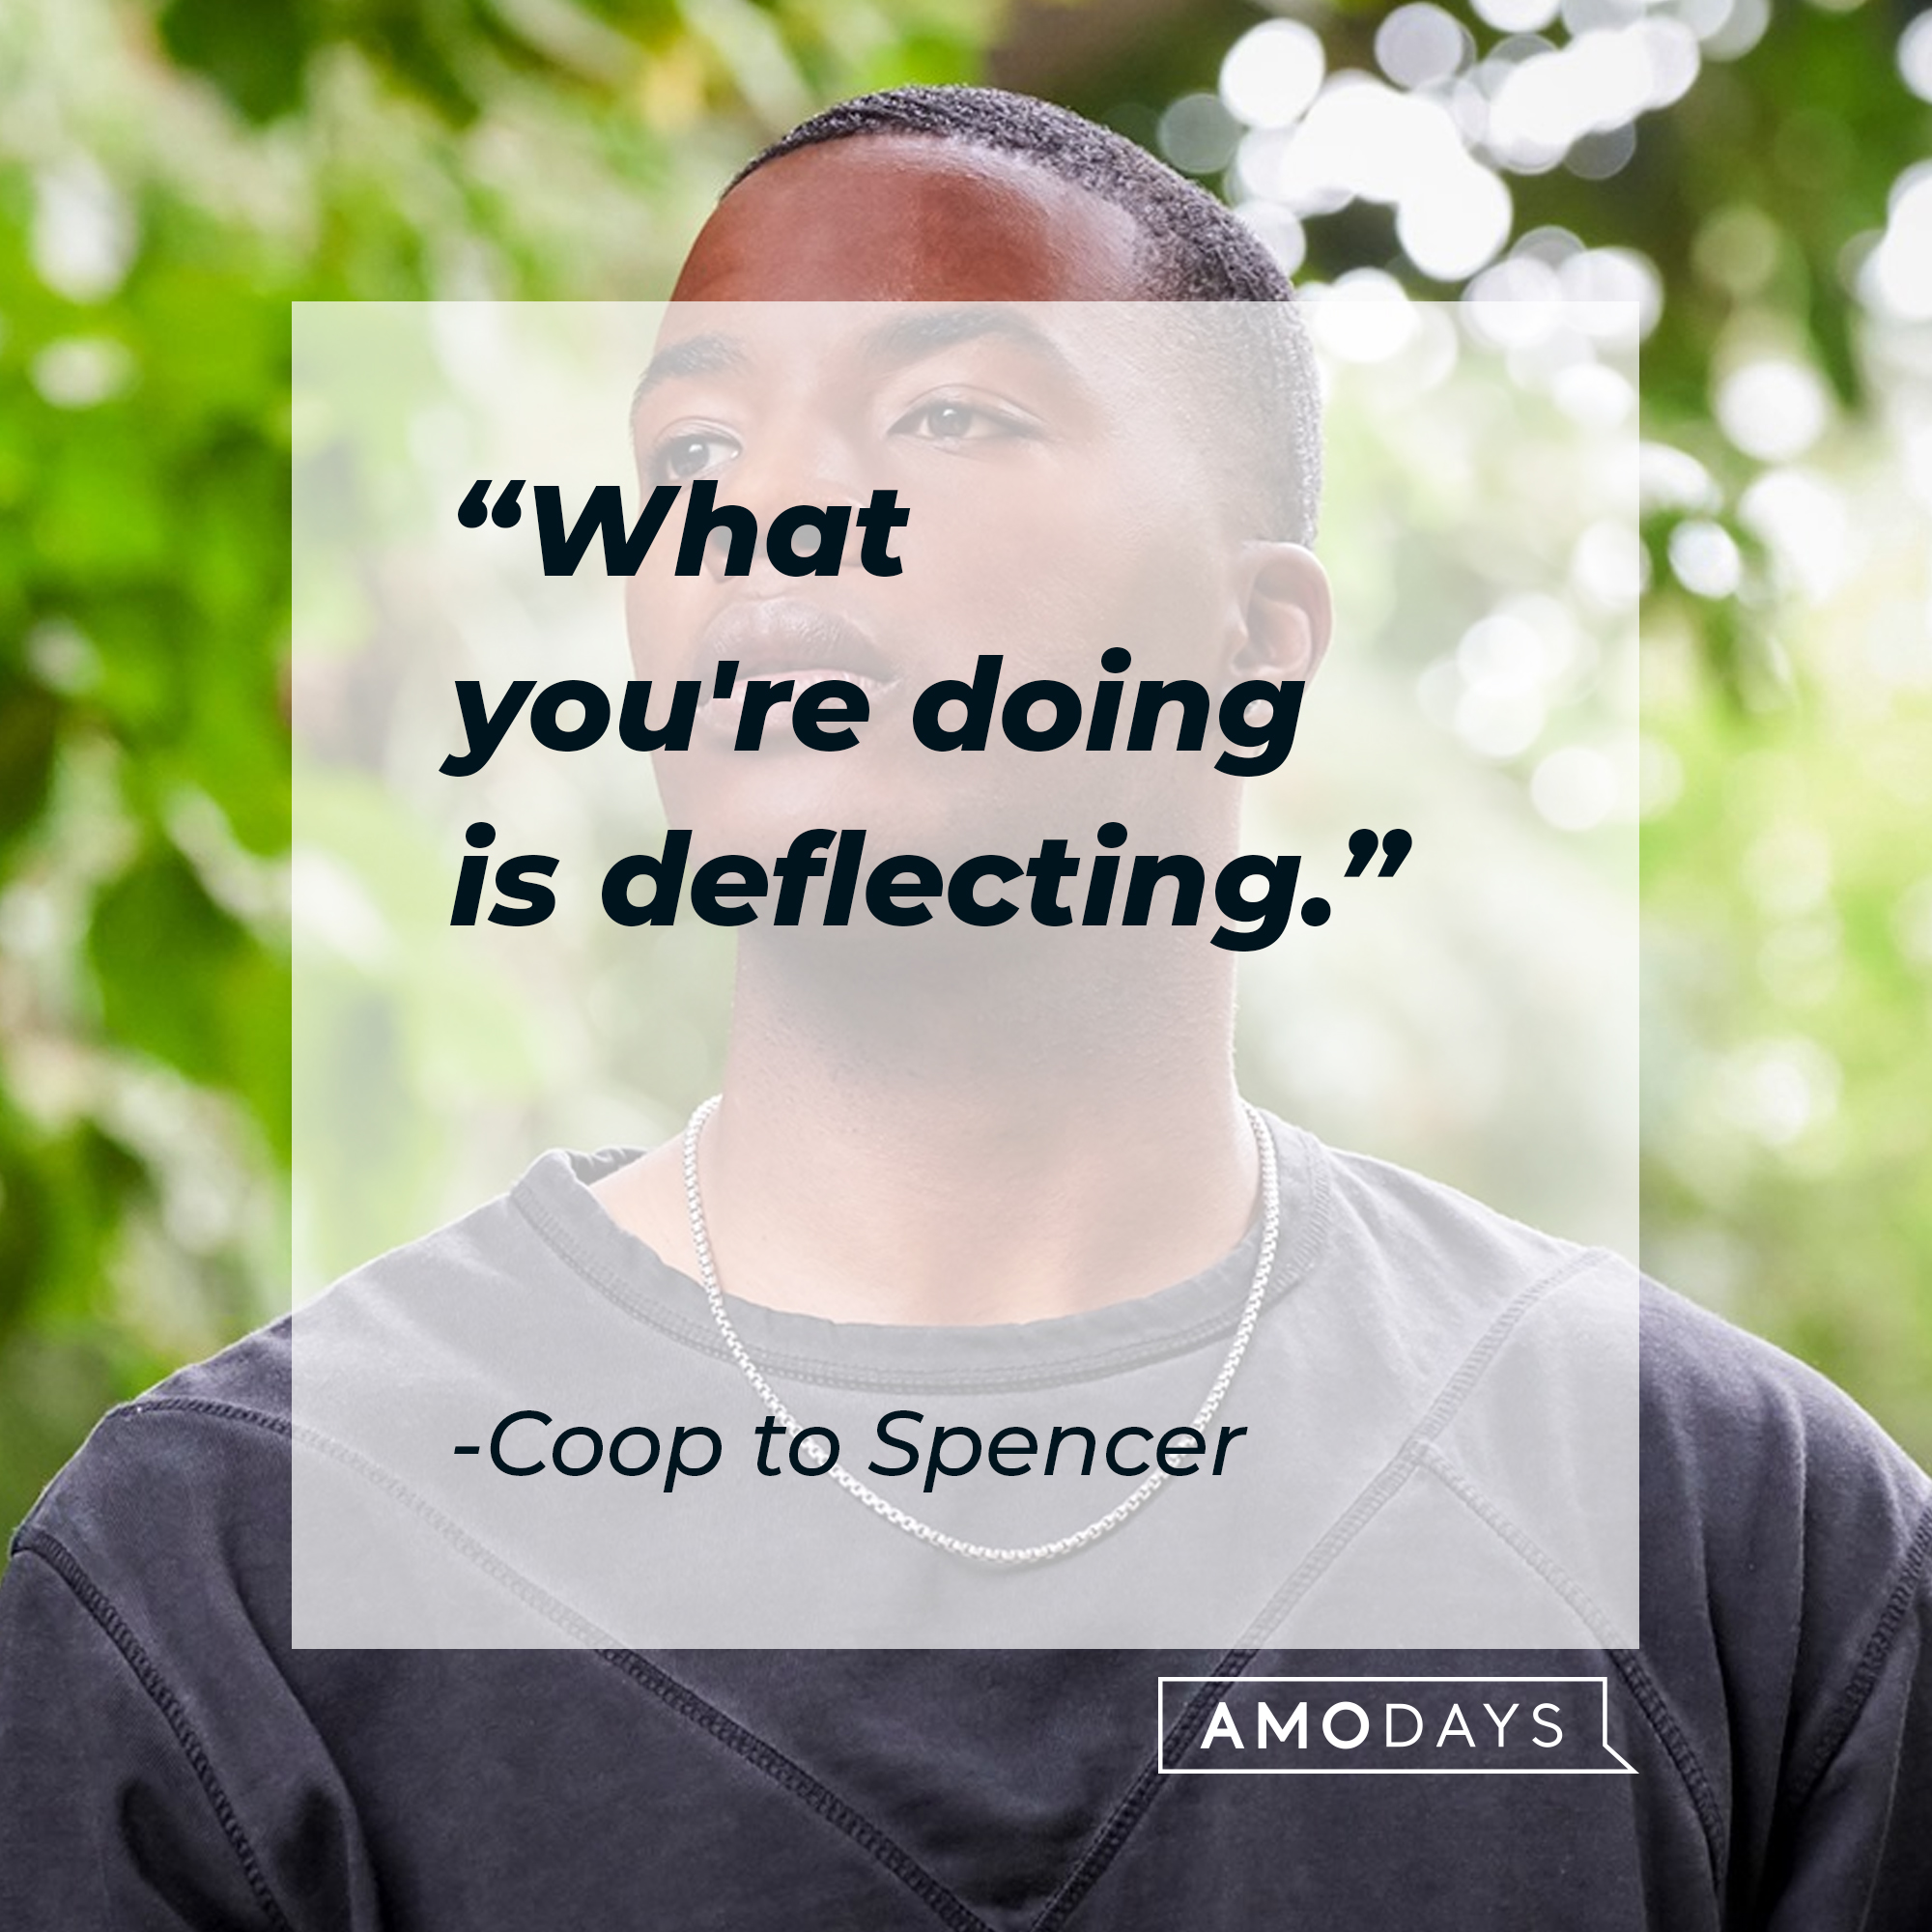 A quote from Coop to Spencer: "What you're doing is deflecting." | Source: facebook.com/CWAllAmerican